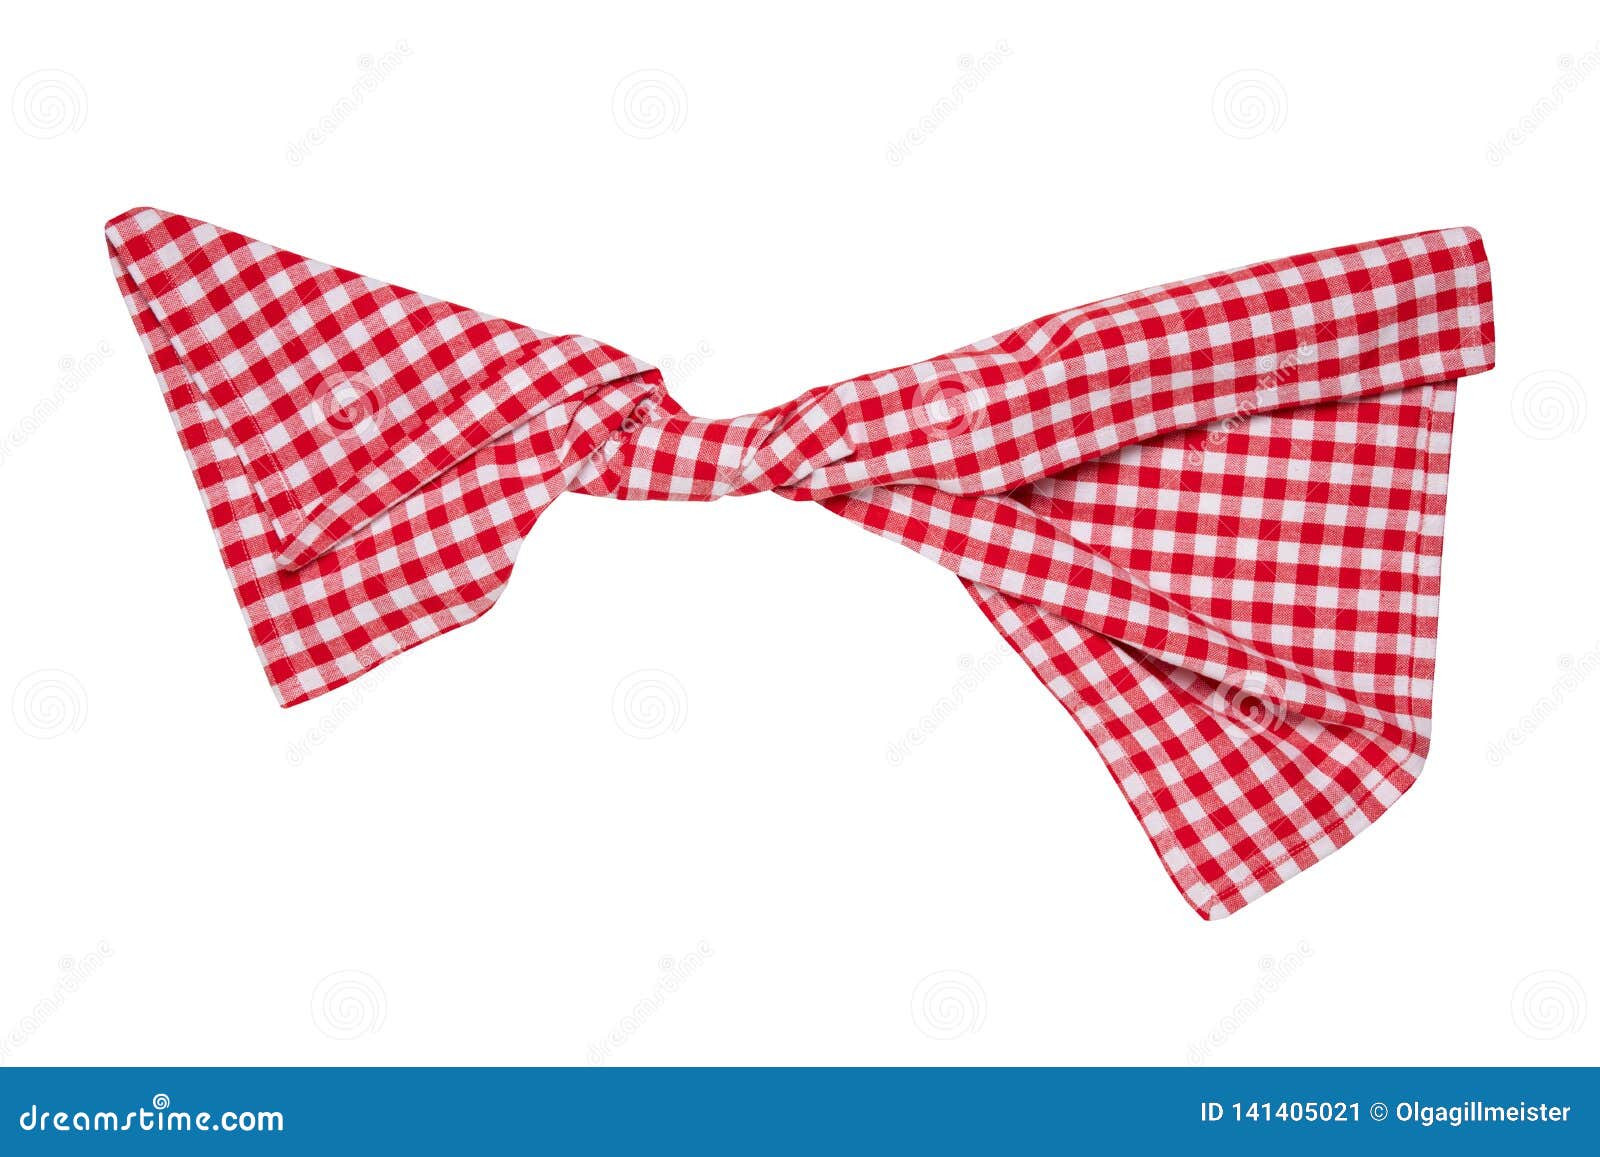 Towels Isolated Close Up Of Red And White Checkered Napkin Or Picnic Tablecloth Texture Isolated On A White Background Kitchen Stock Image Image Of Cooking Dish 141405021